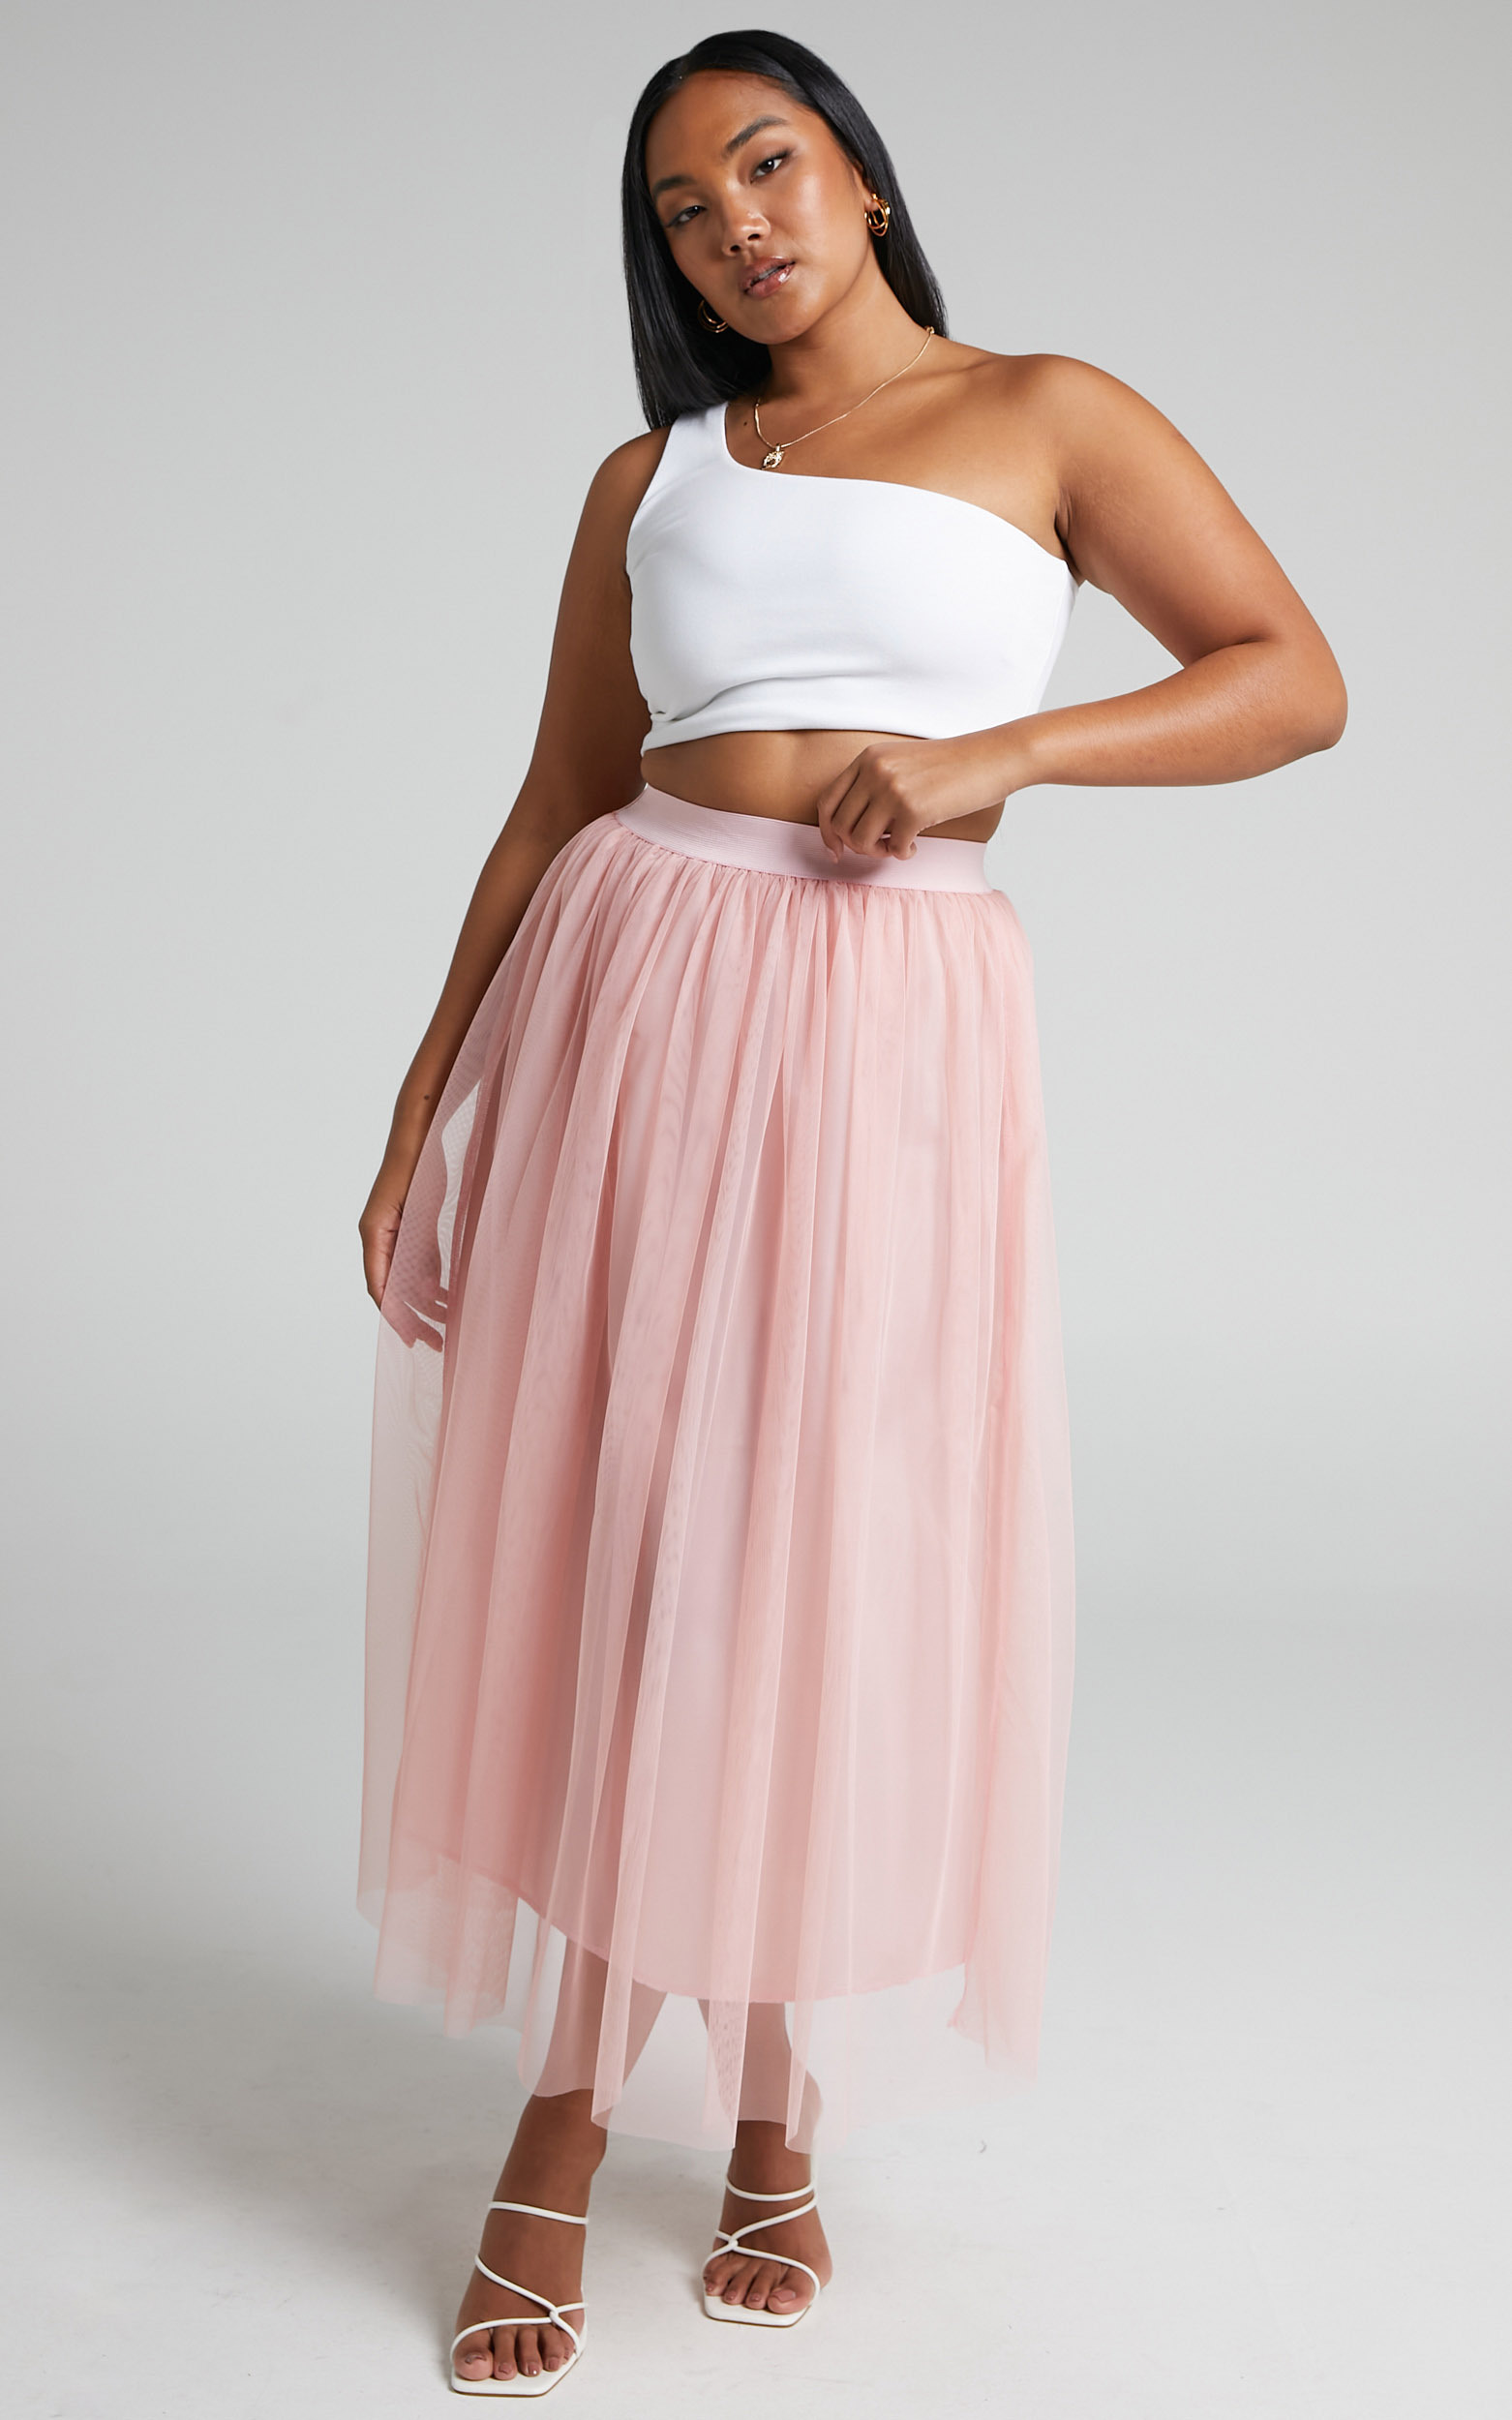 Louejoy Maxi Skirt in Tulle in Pale Pink - 06, PNK1, hi-res image number null